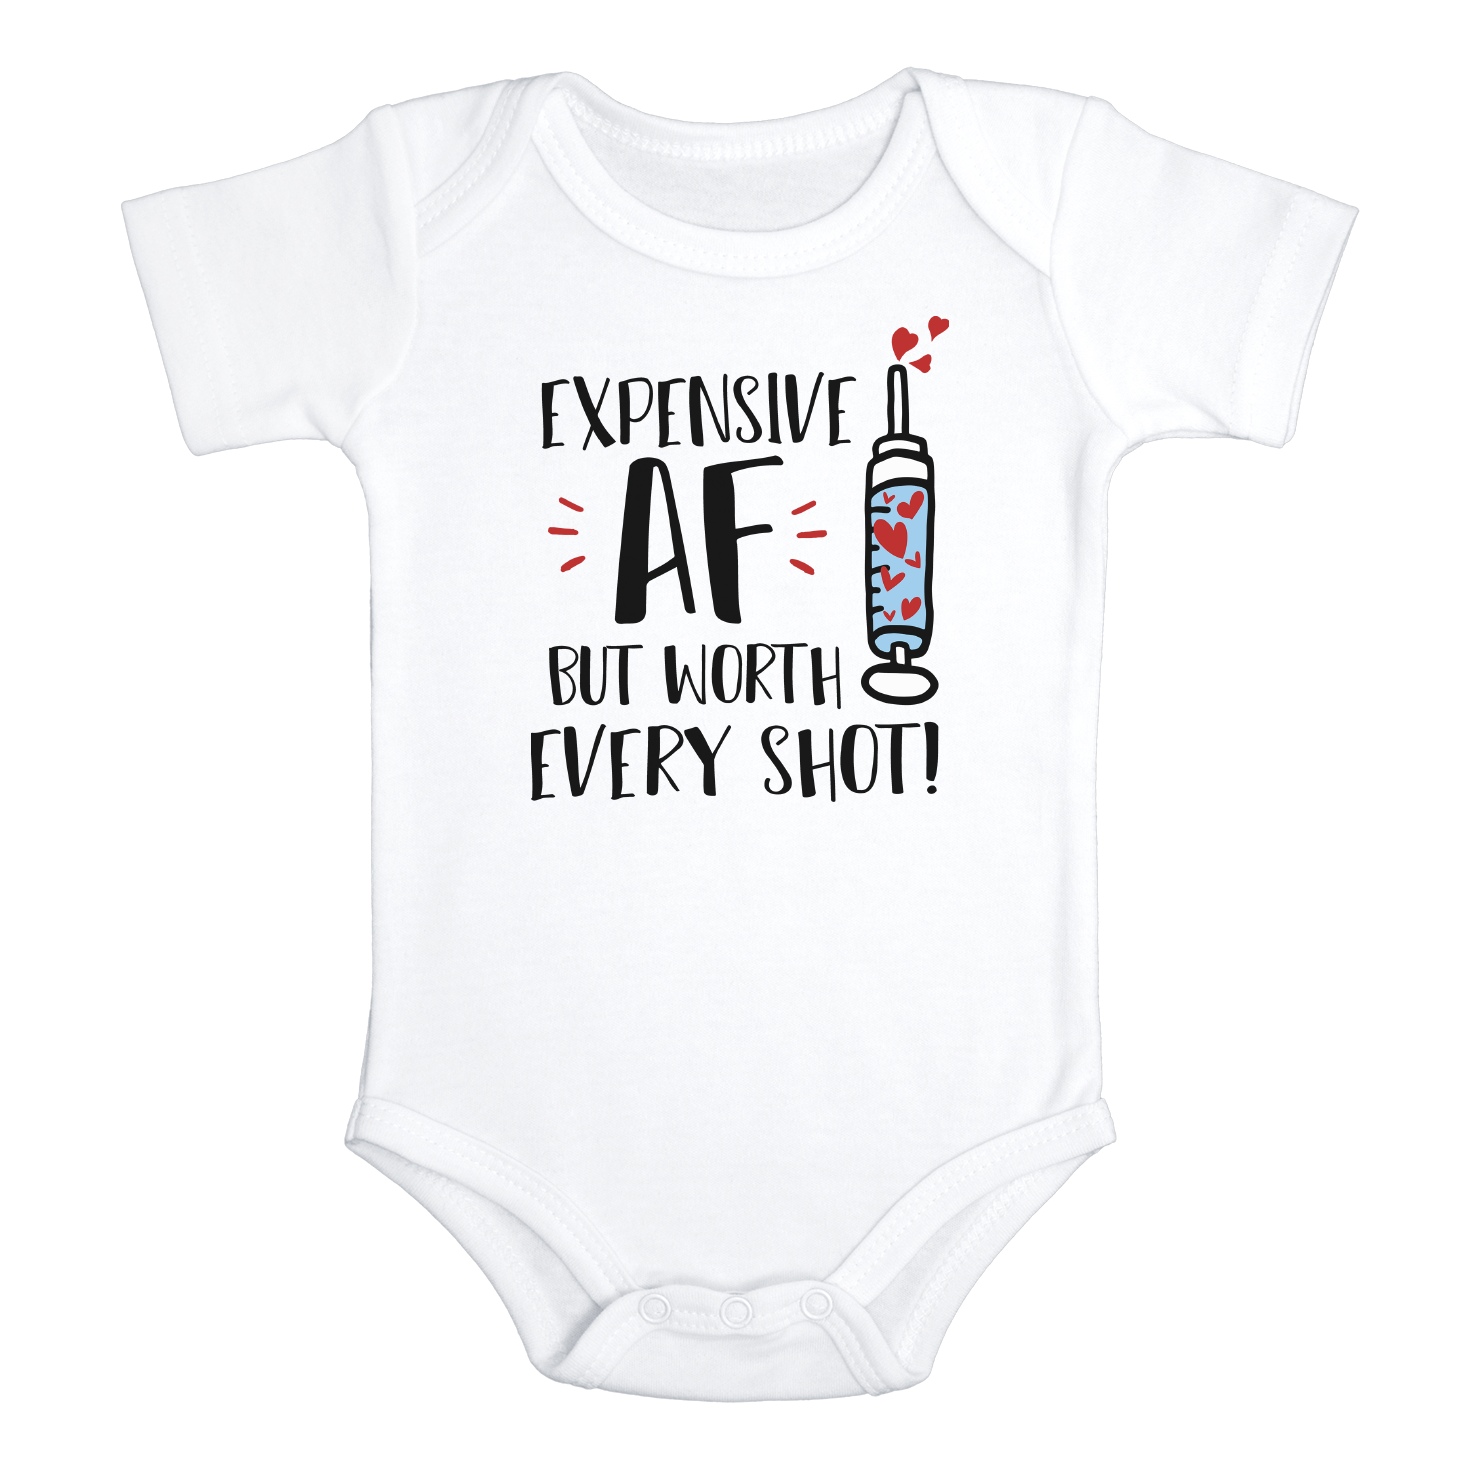 EXPENSIVE AF BUT WORTH EVERY SHOT Baby Funny In Vitro Fertilization Baby Onesie / Bodysuit White